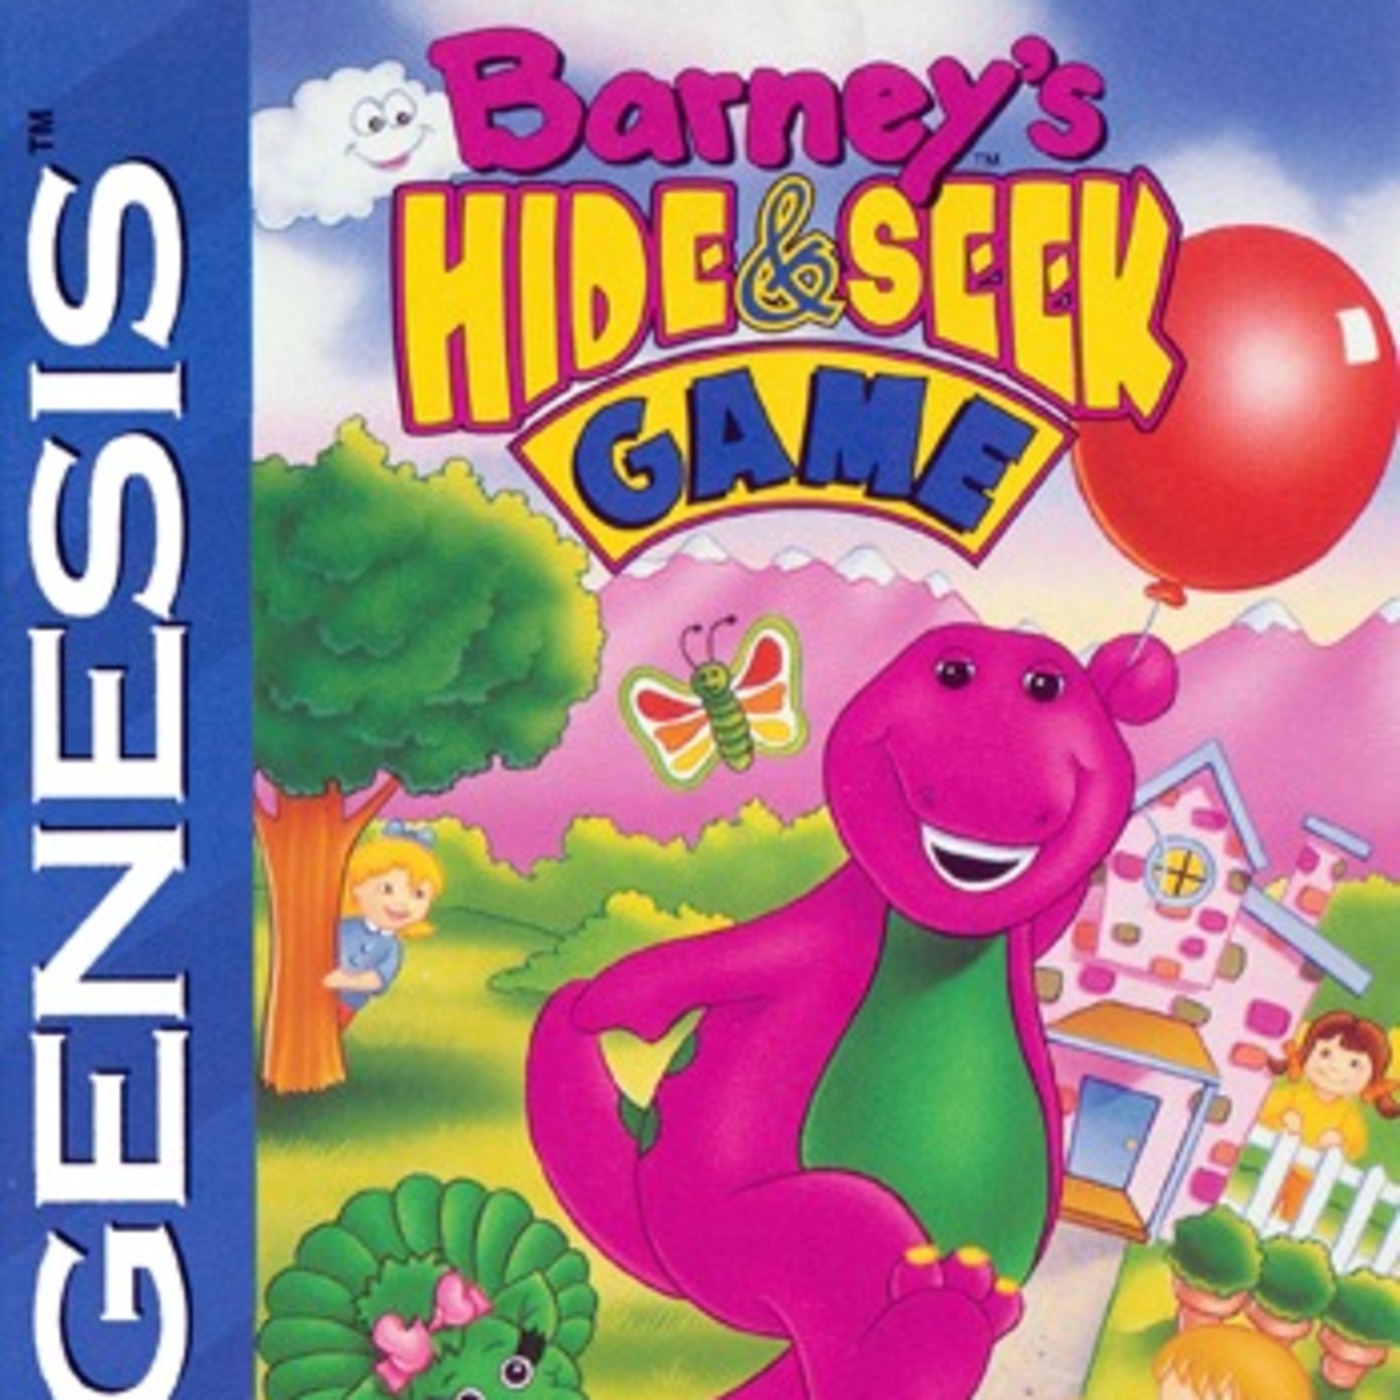 Episode 56 (Barney's Hide and Seek Game)